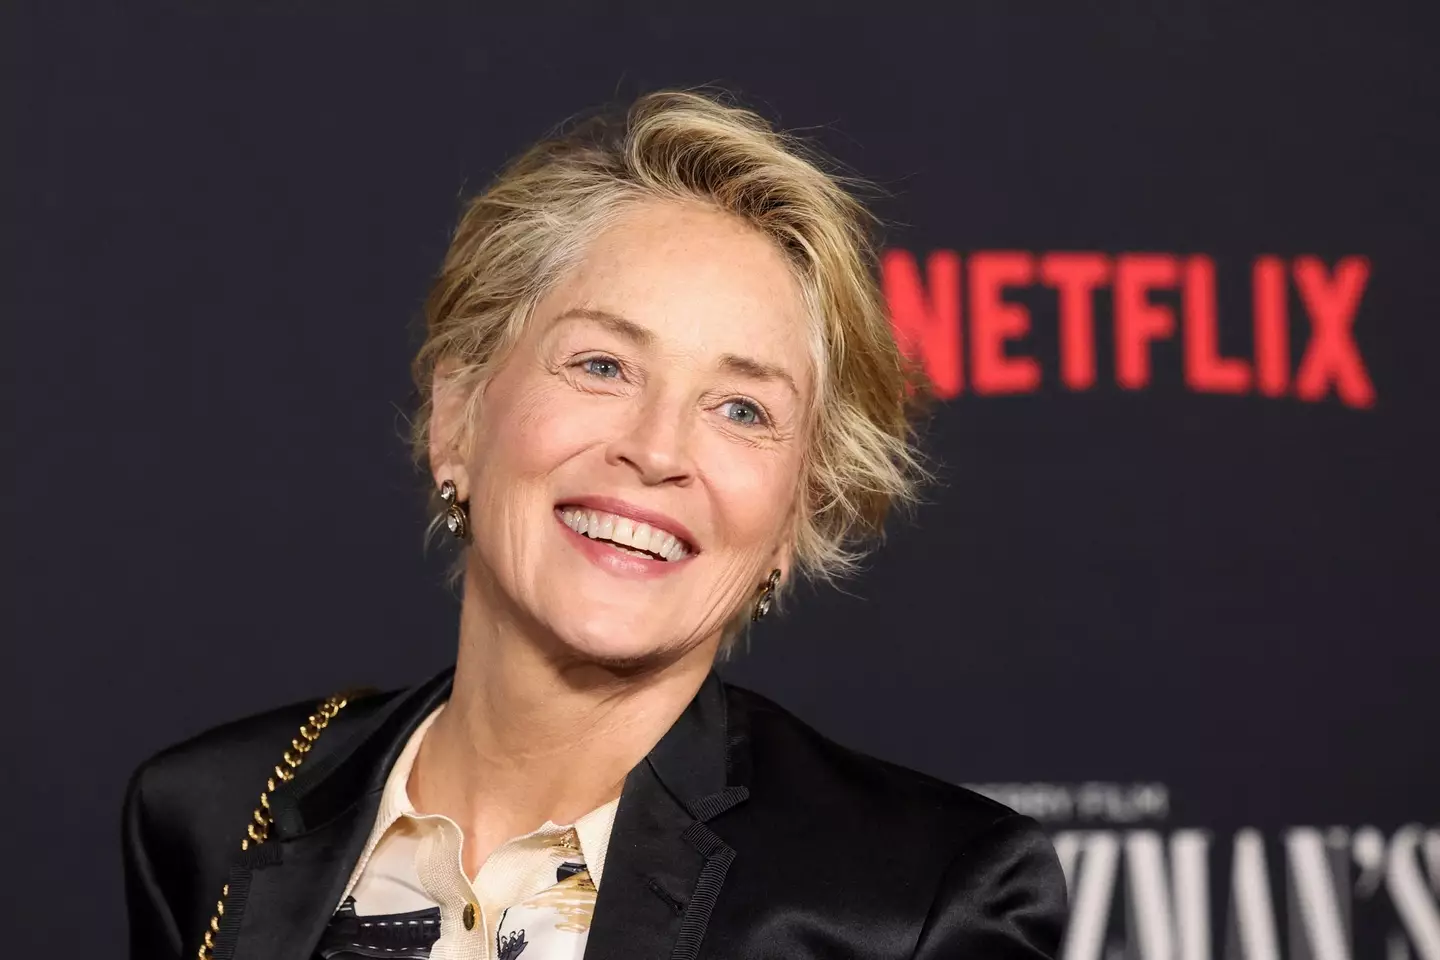 Sharon Stone had an important message for her followers.